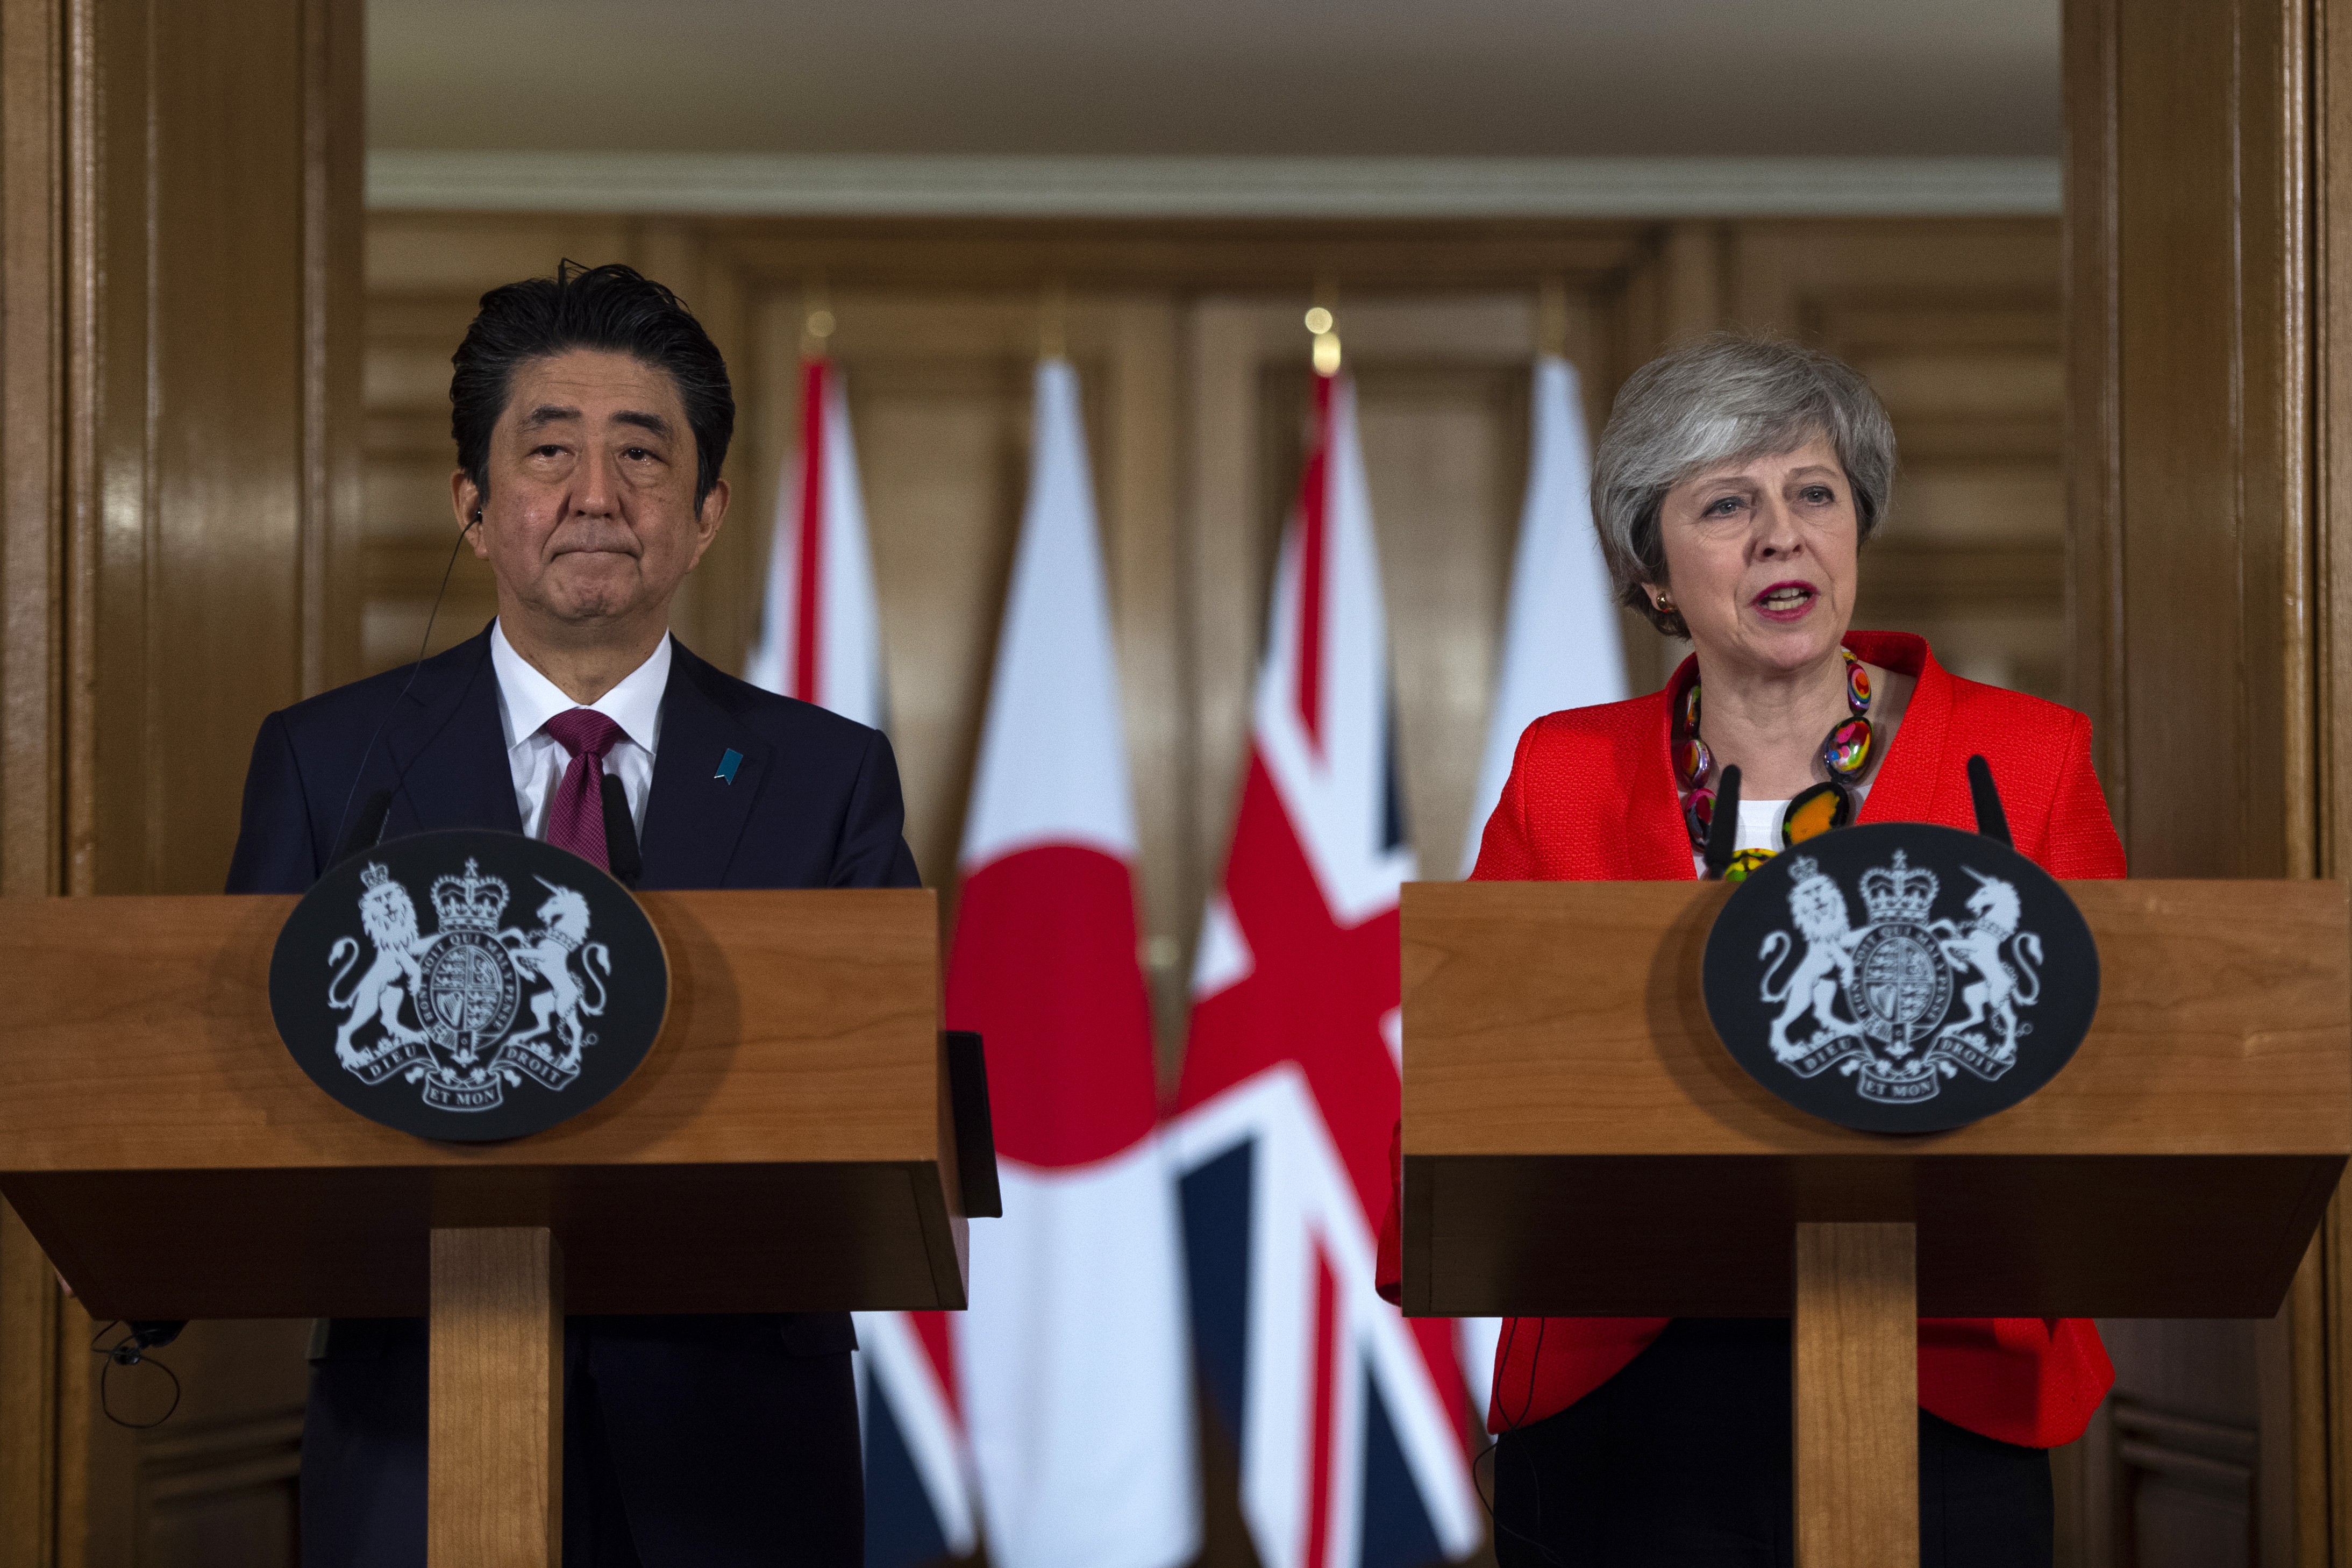 UK Prime Minister Theresa May speaks while Japan’s Prime Minister Shinzo Abe listens during their joint news conference in London on January 10. Britain’s attempts at negotiating a post-Brexit trade deal with Japan hit a roadblock when Tokyo expressed frustration with UK officials’ negotiation tactics. Photo: Pool via Bloomberg